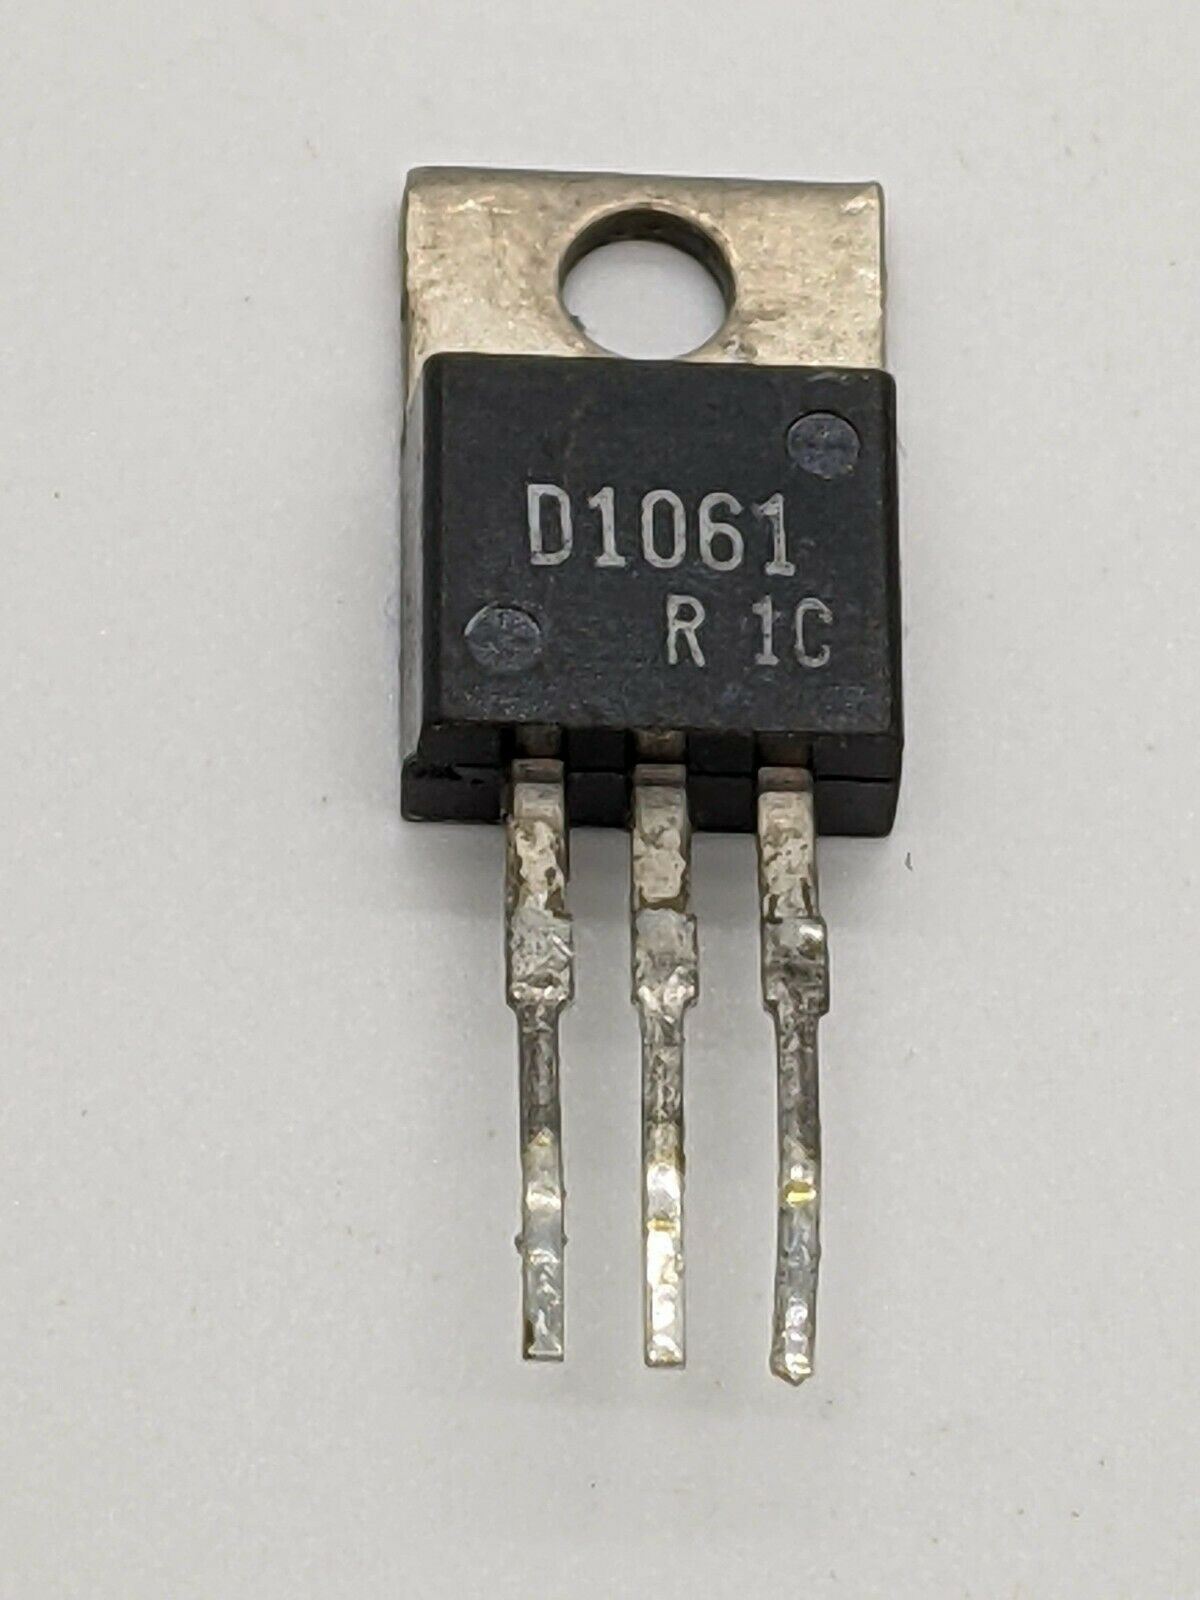 2SD1061 Pullout NPN Silicon Epitaxial Transistor D1061